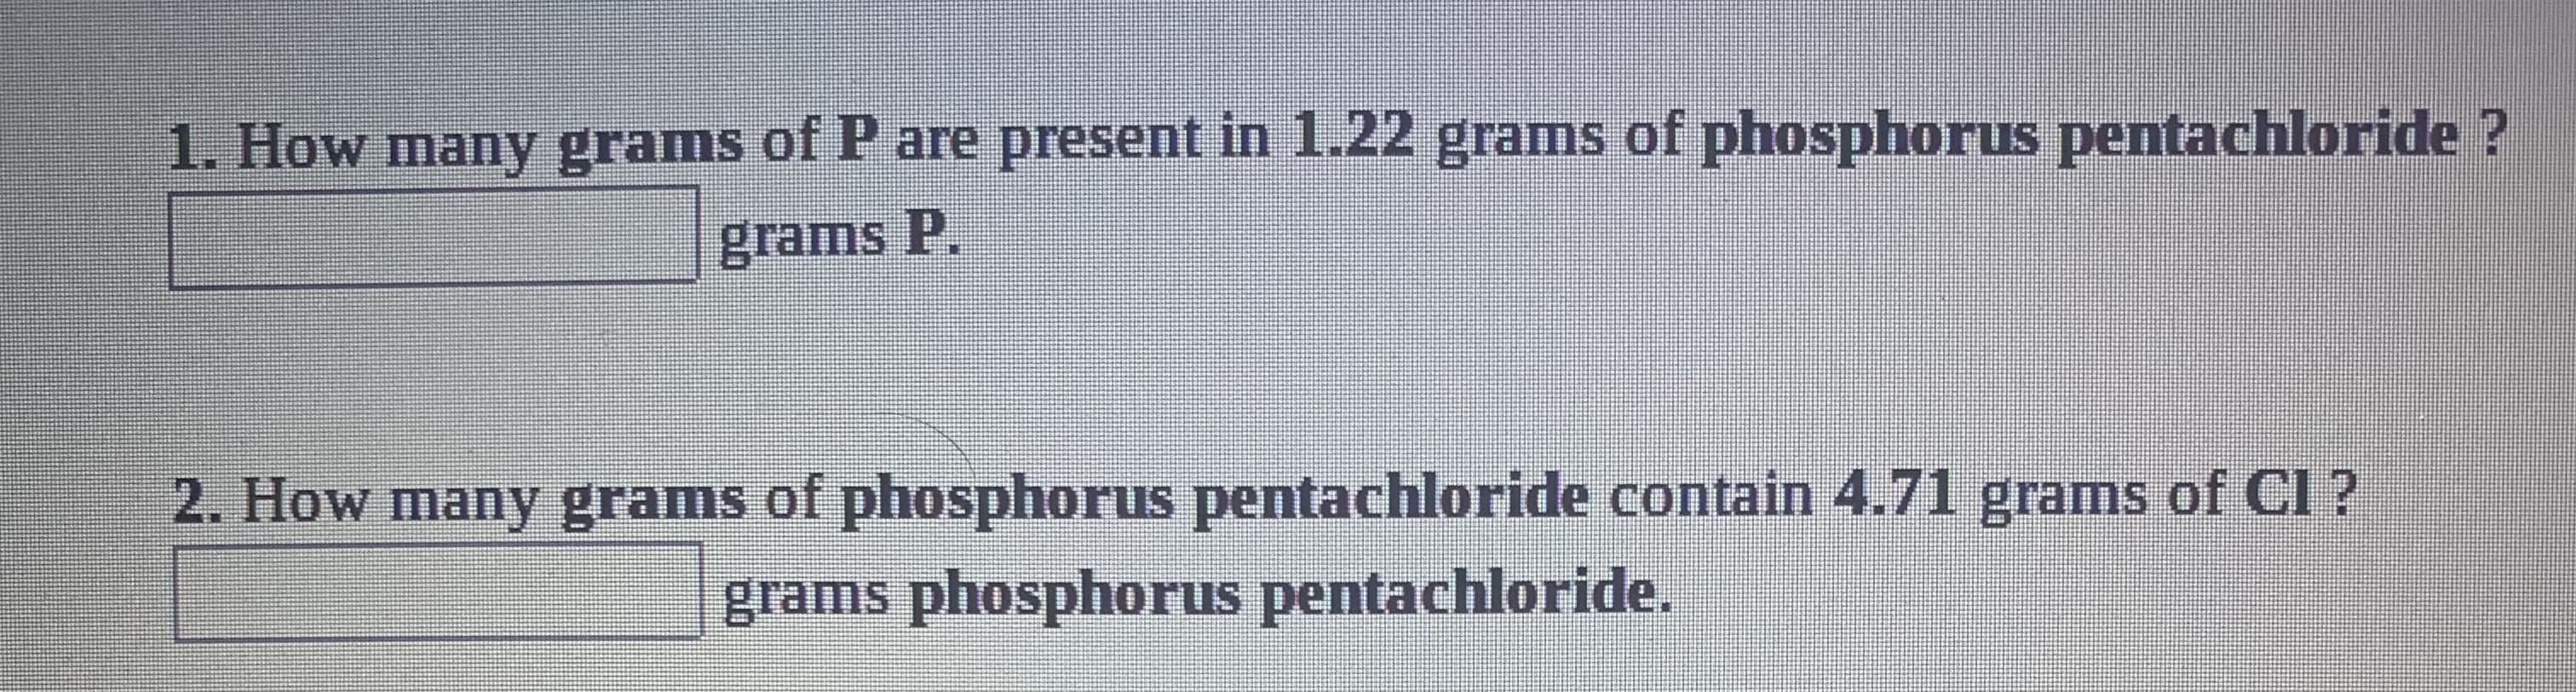 1. How many grams of P are present in 1.22 grams of phosphorus pentachloride ?
grams P.
2. How many grams of phosphorus pentachloride contain 4.71 grams of Cl ?
grams phosphorus pentachloride.
